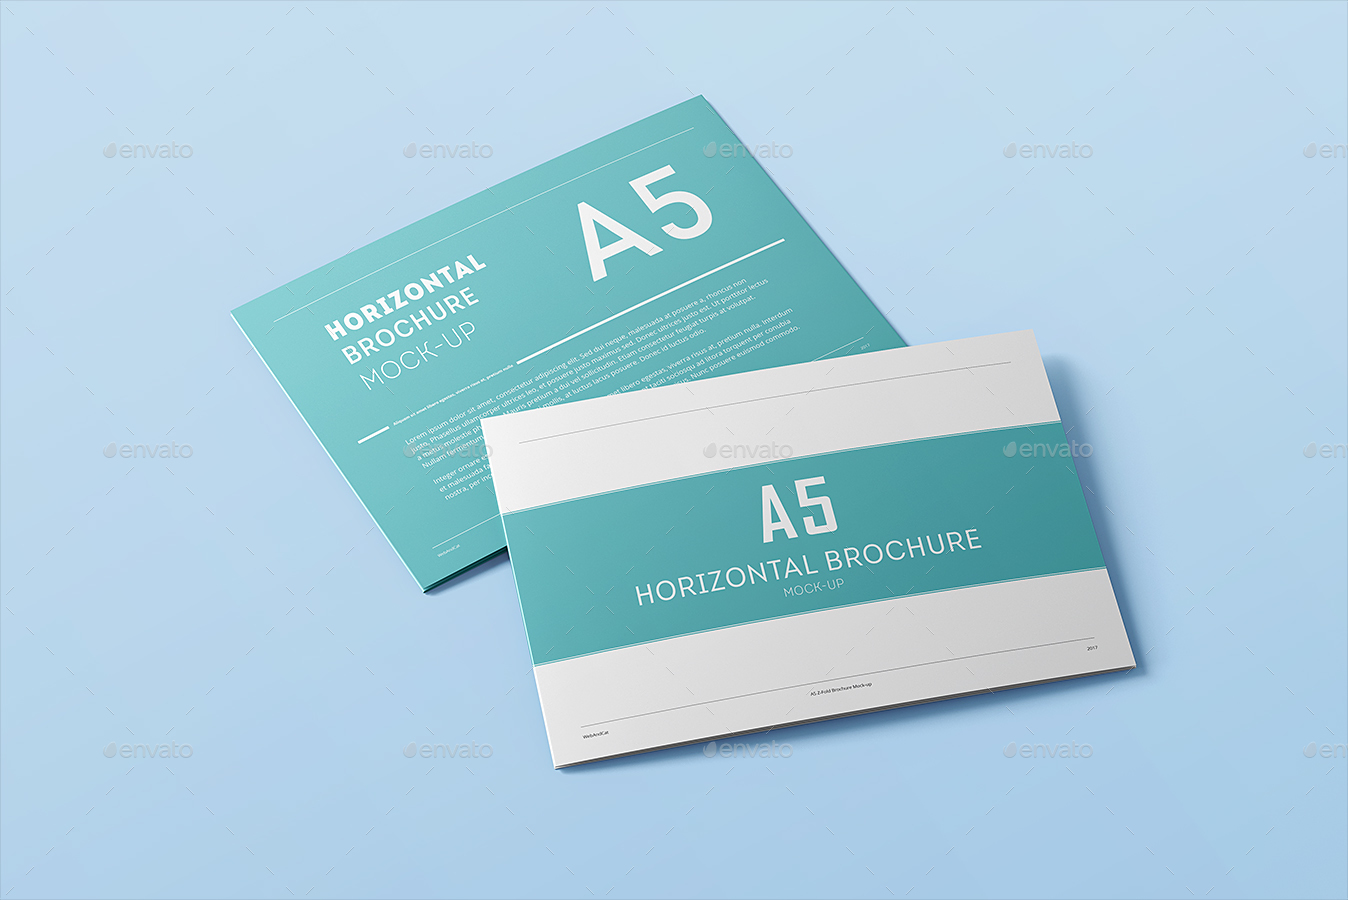 Download A5 Tri-Fold Horizontal Brochure Mock-up by webandcat | GraphicRiver